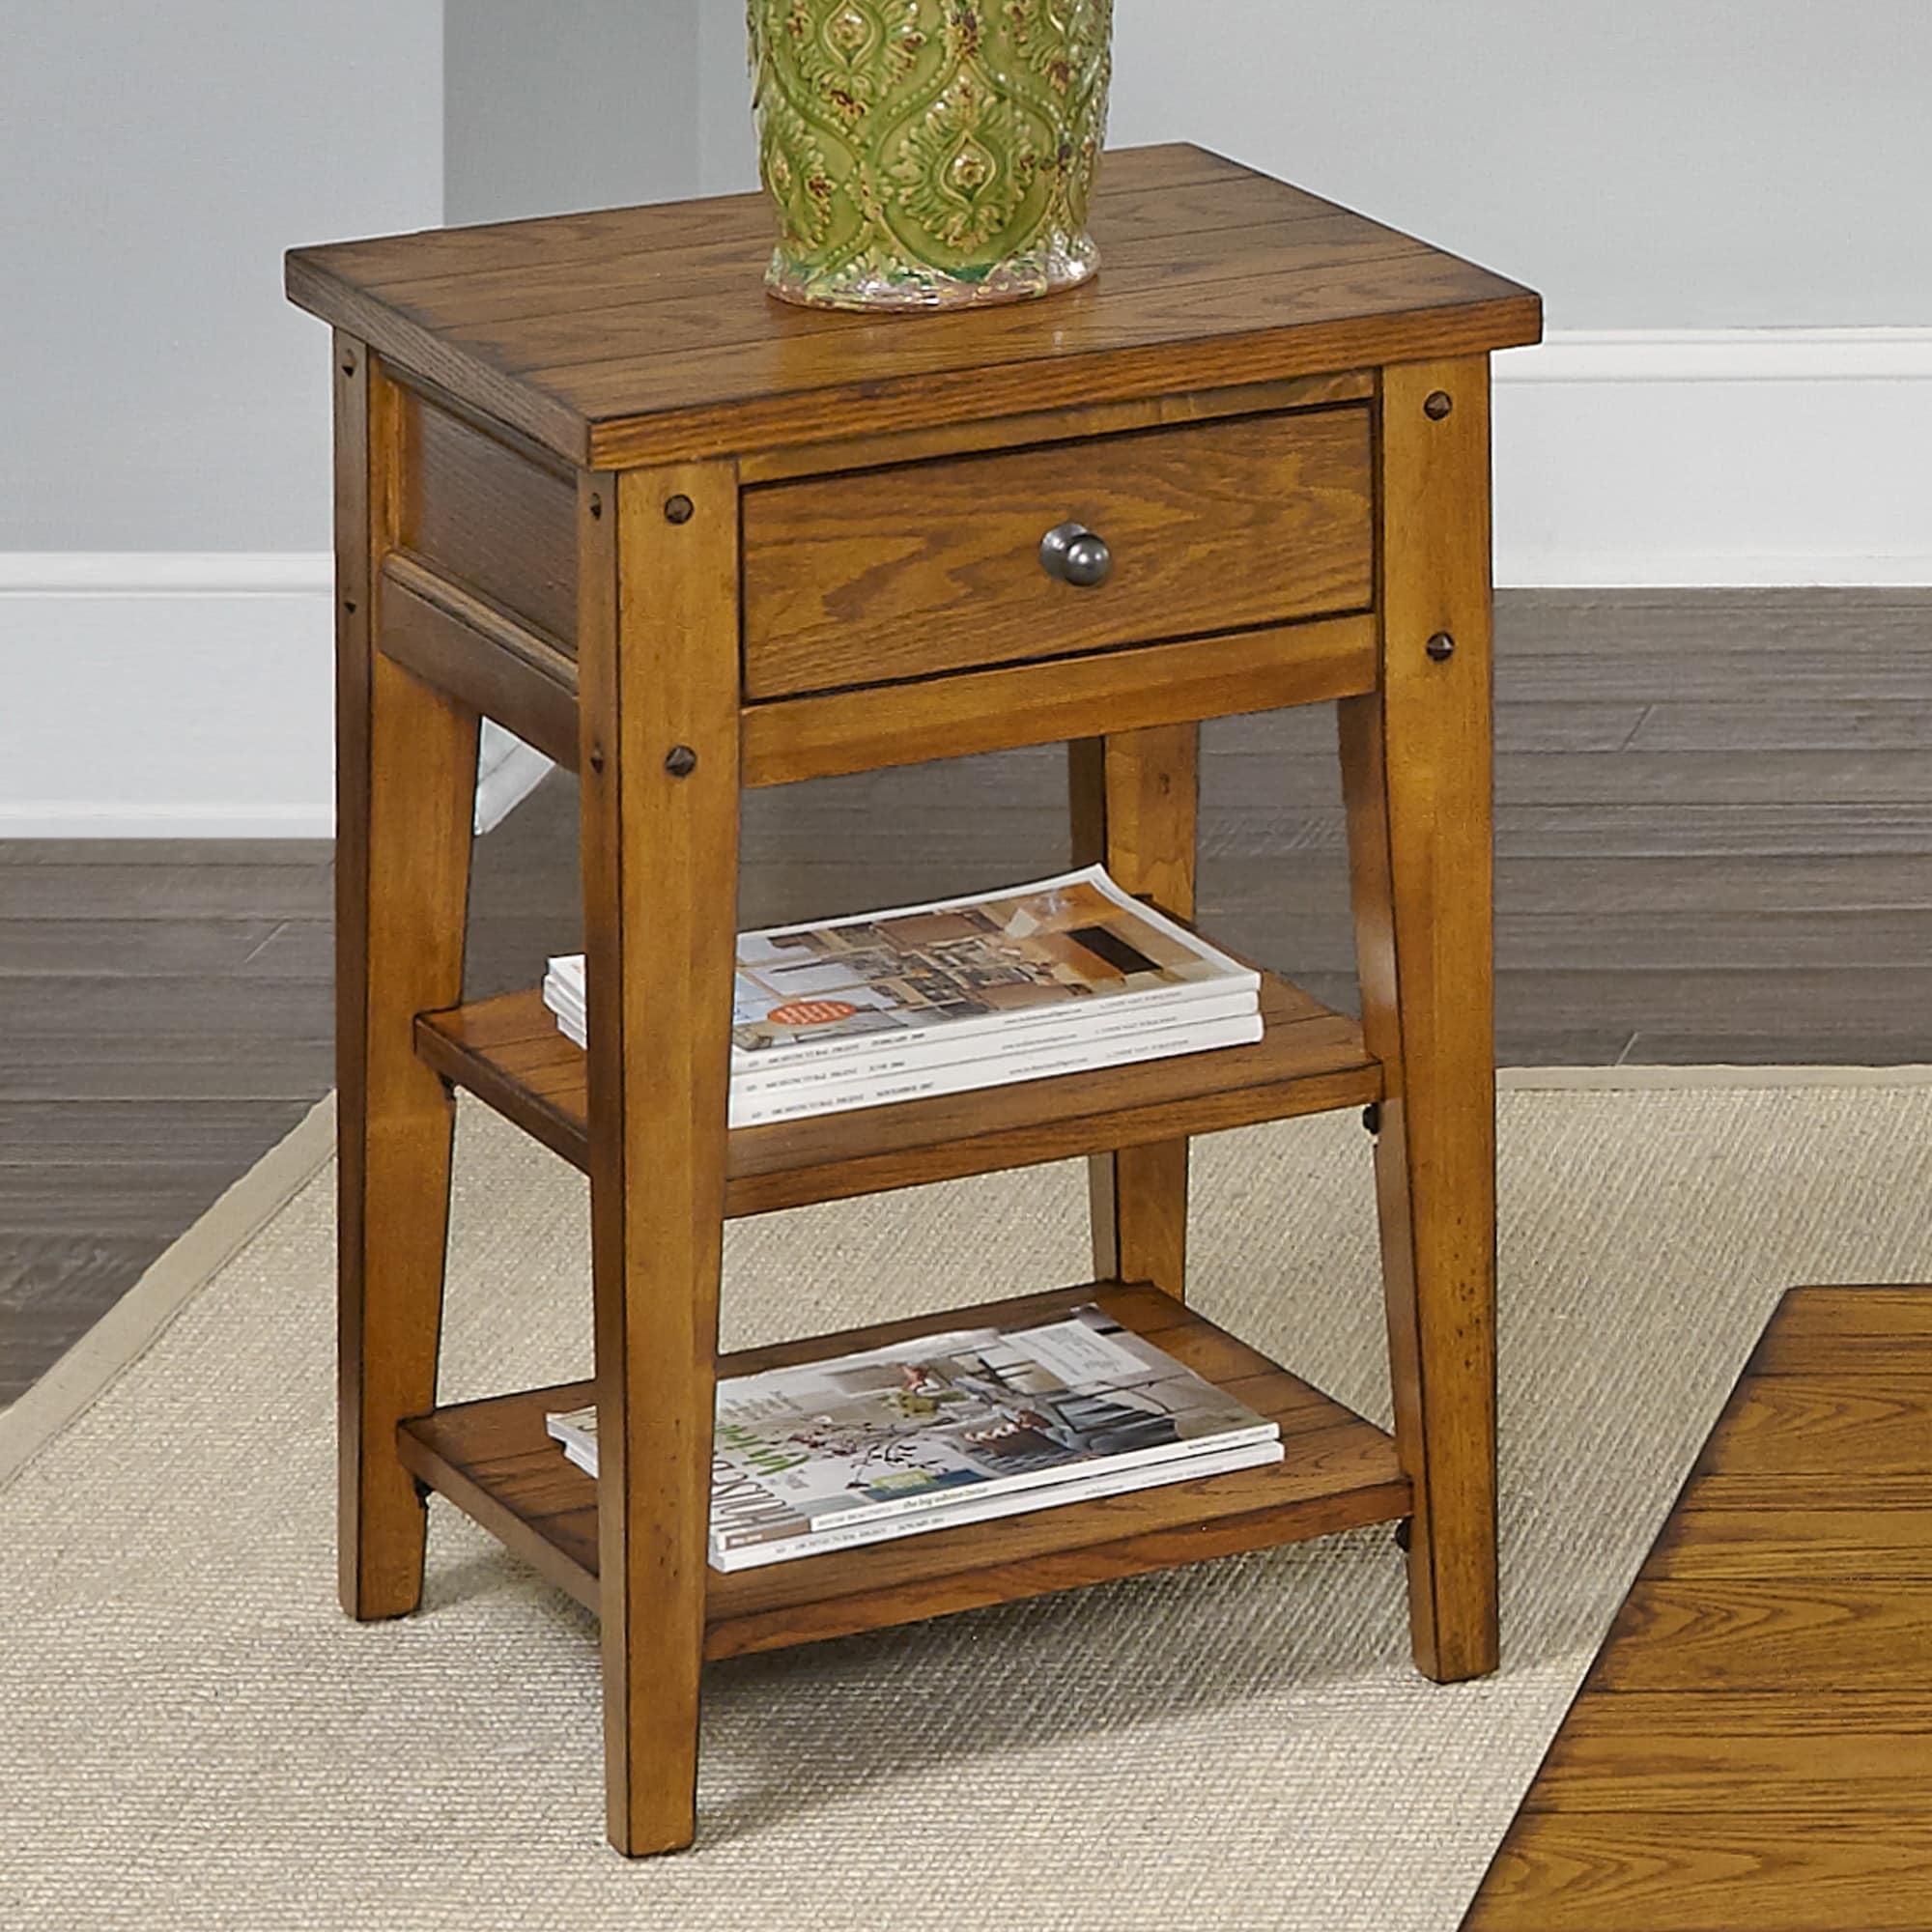 Rustic Golden Oak 18'' Square Chairside Table with Storage